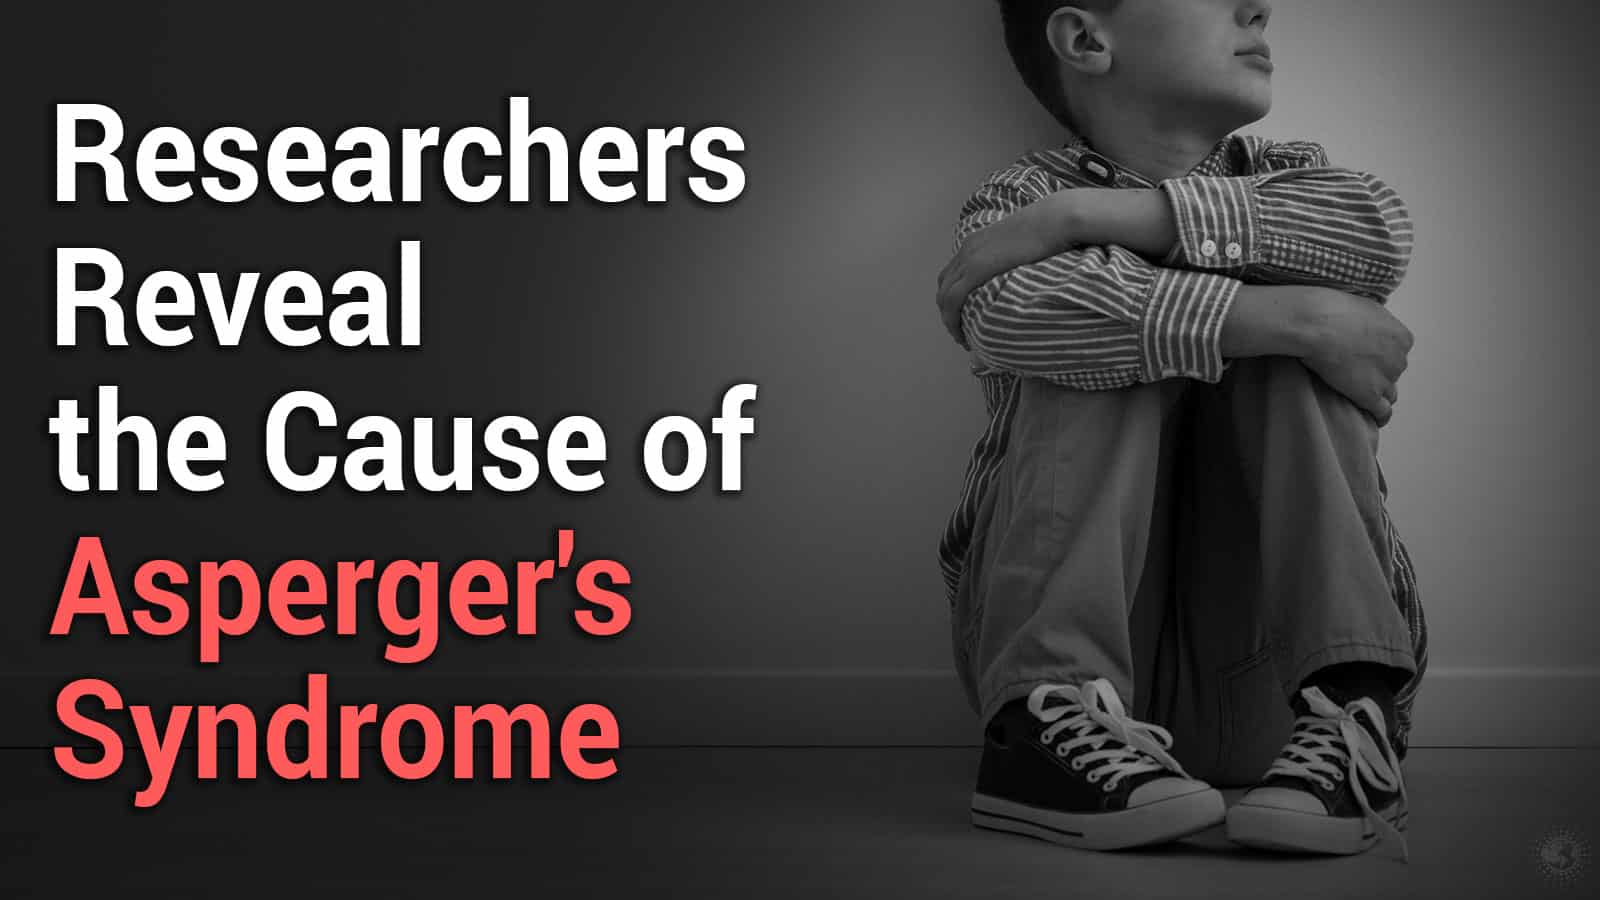 1583030720_Researchers-Reveal-the-Cause-of-Aspergers-Syndrome.jpg